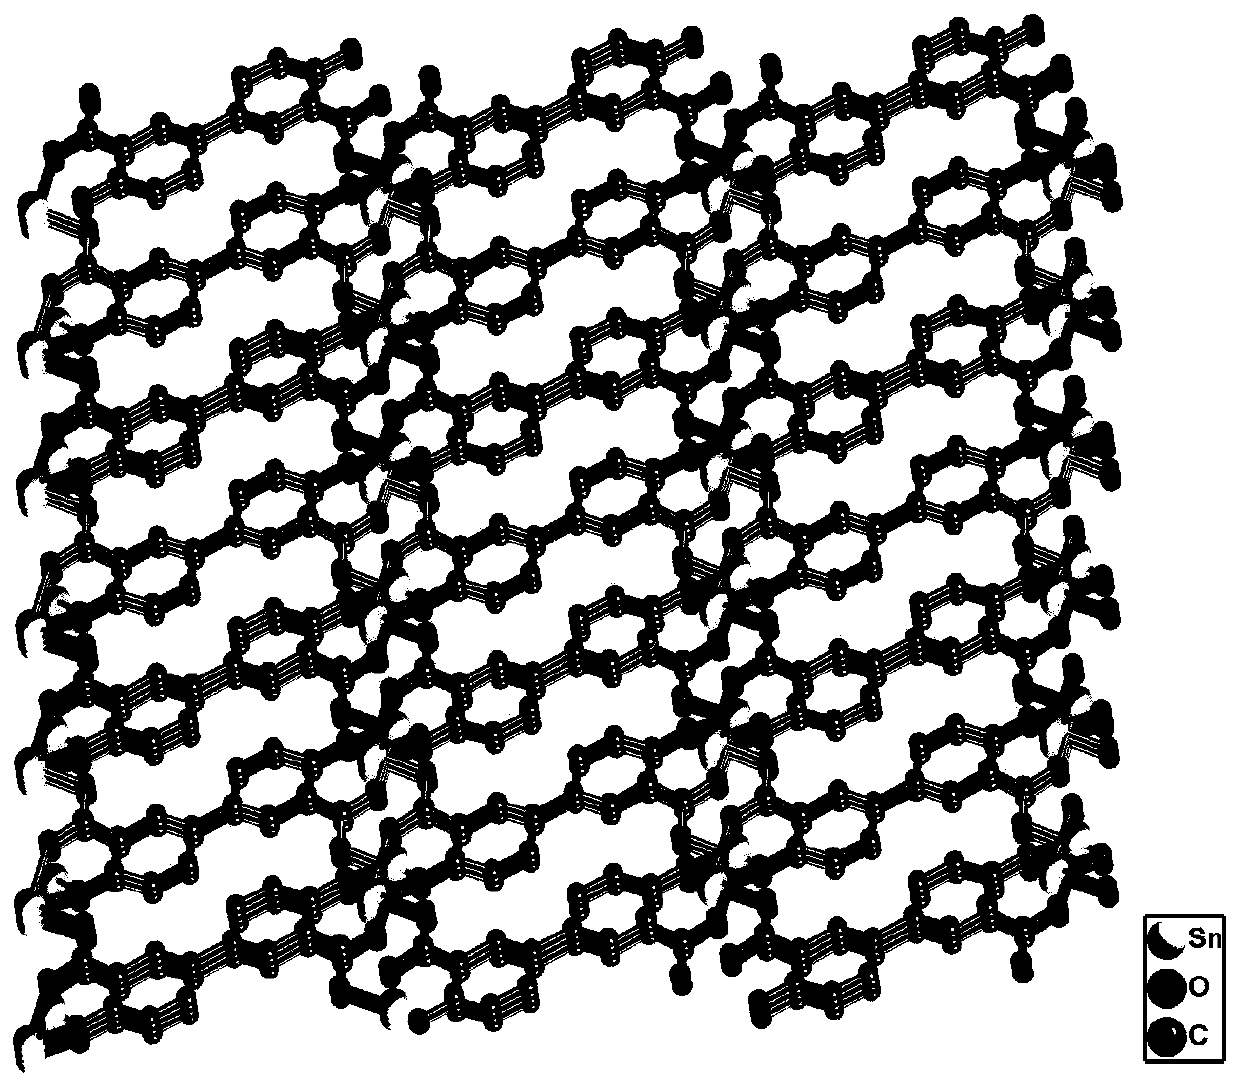 Tin-based metal-organic framework and preparation method thereof, and application of tin-based metal-organic framework as lithium ion battery negative electrode material